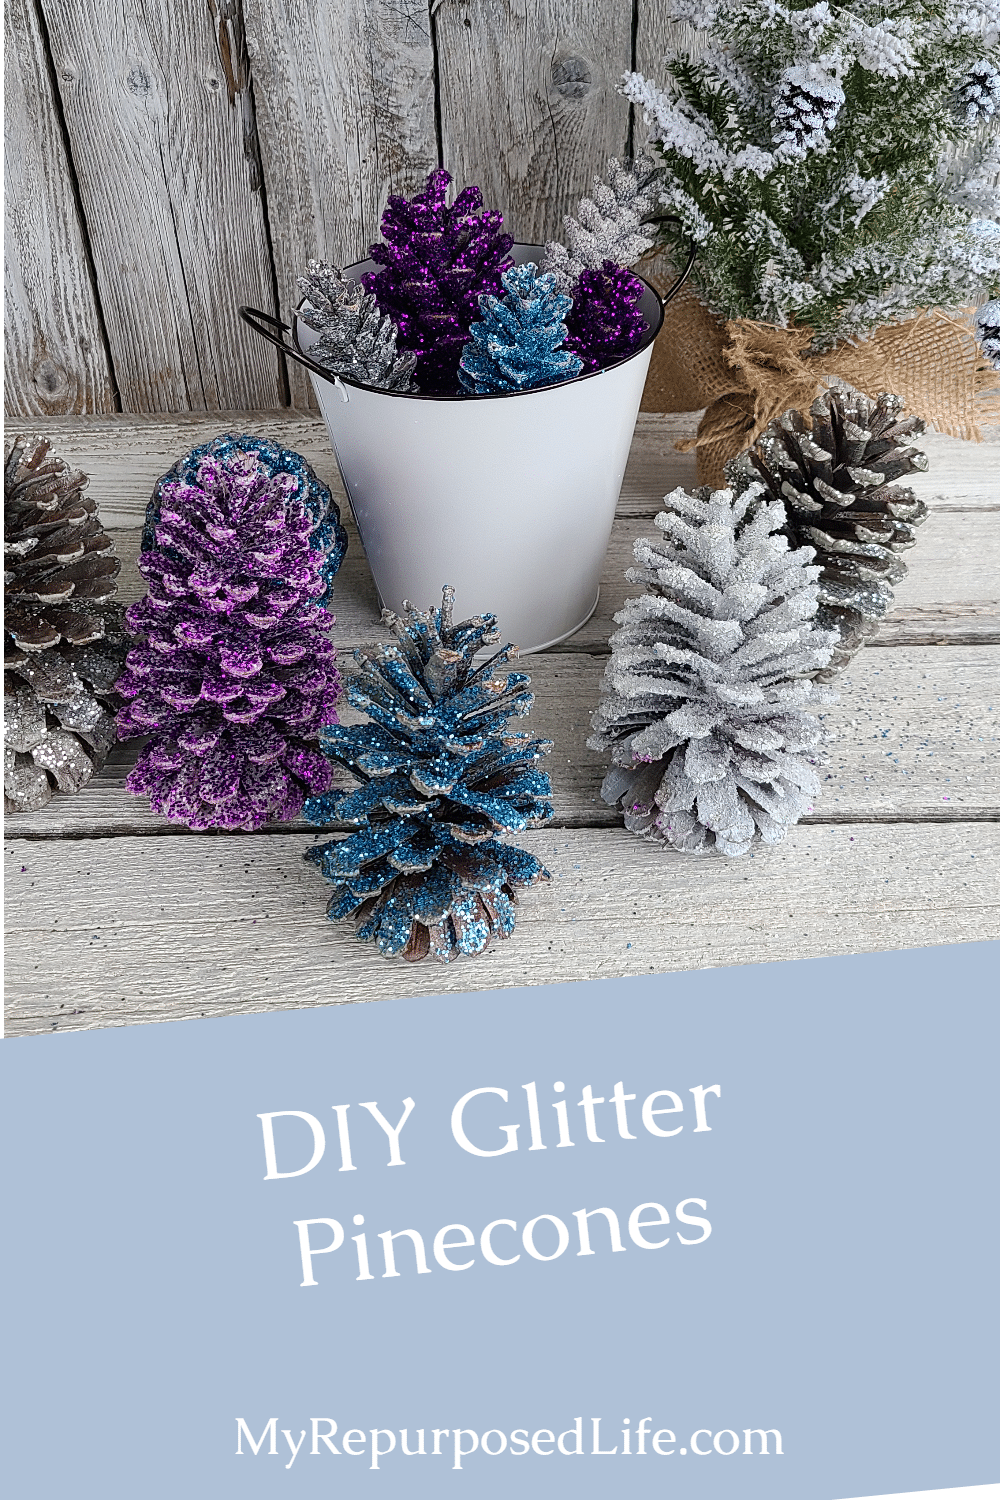 How to make pretty, colorful glittered pine cones for your home decor. Lots of tips and tidbits to make this an easy afternoon project. #MyRepurposedLife #Christmas #easy #decor #diy #project via @repurposedlife